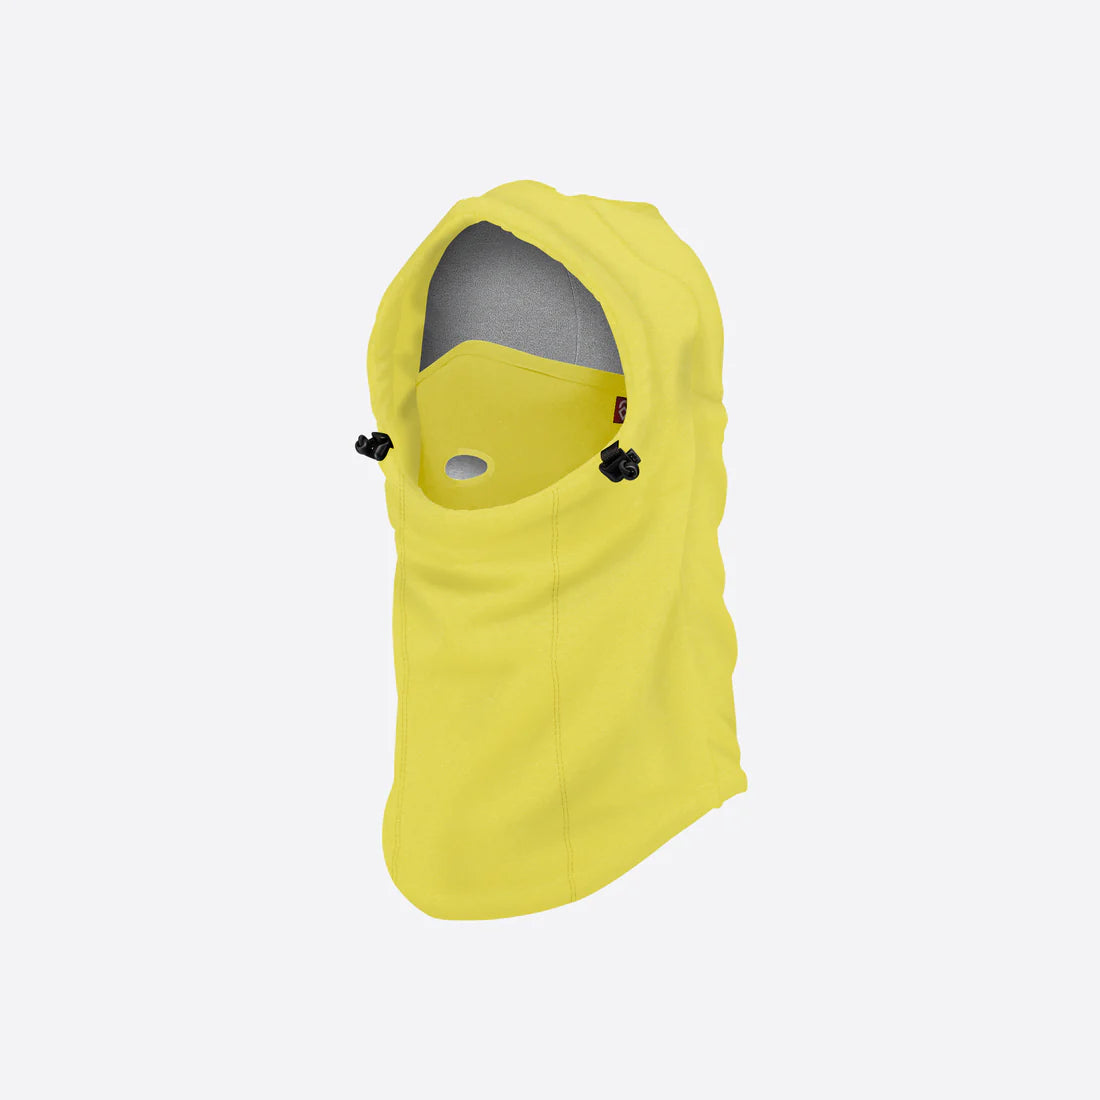 Airhole Airhood Pullover snowboard Facemask